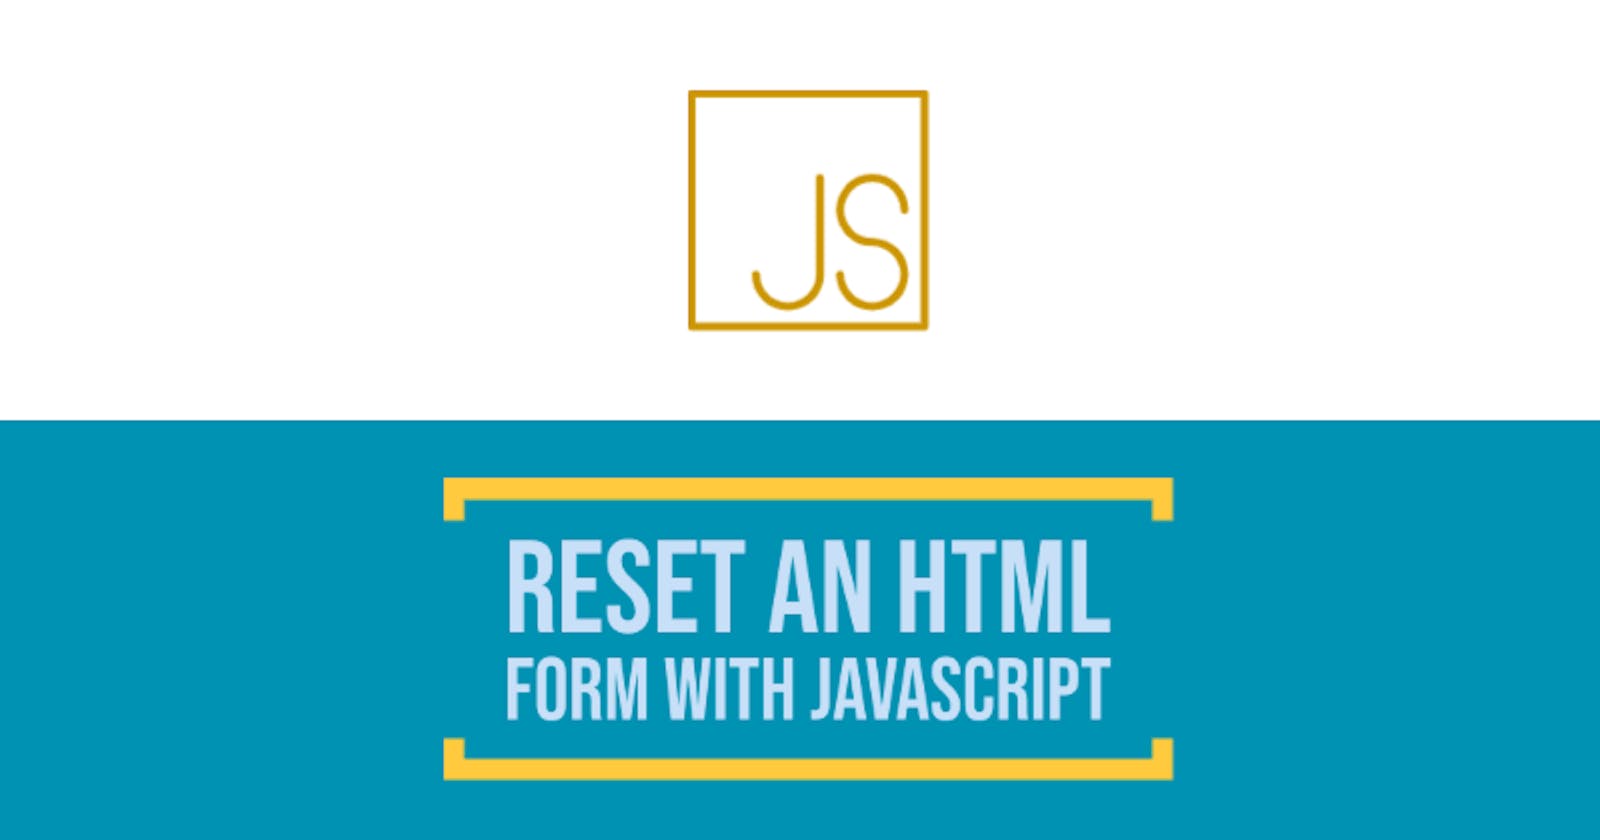 How To Reset An HTML Form With JavaScript